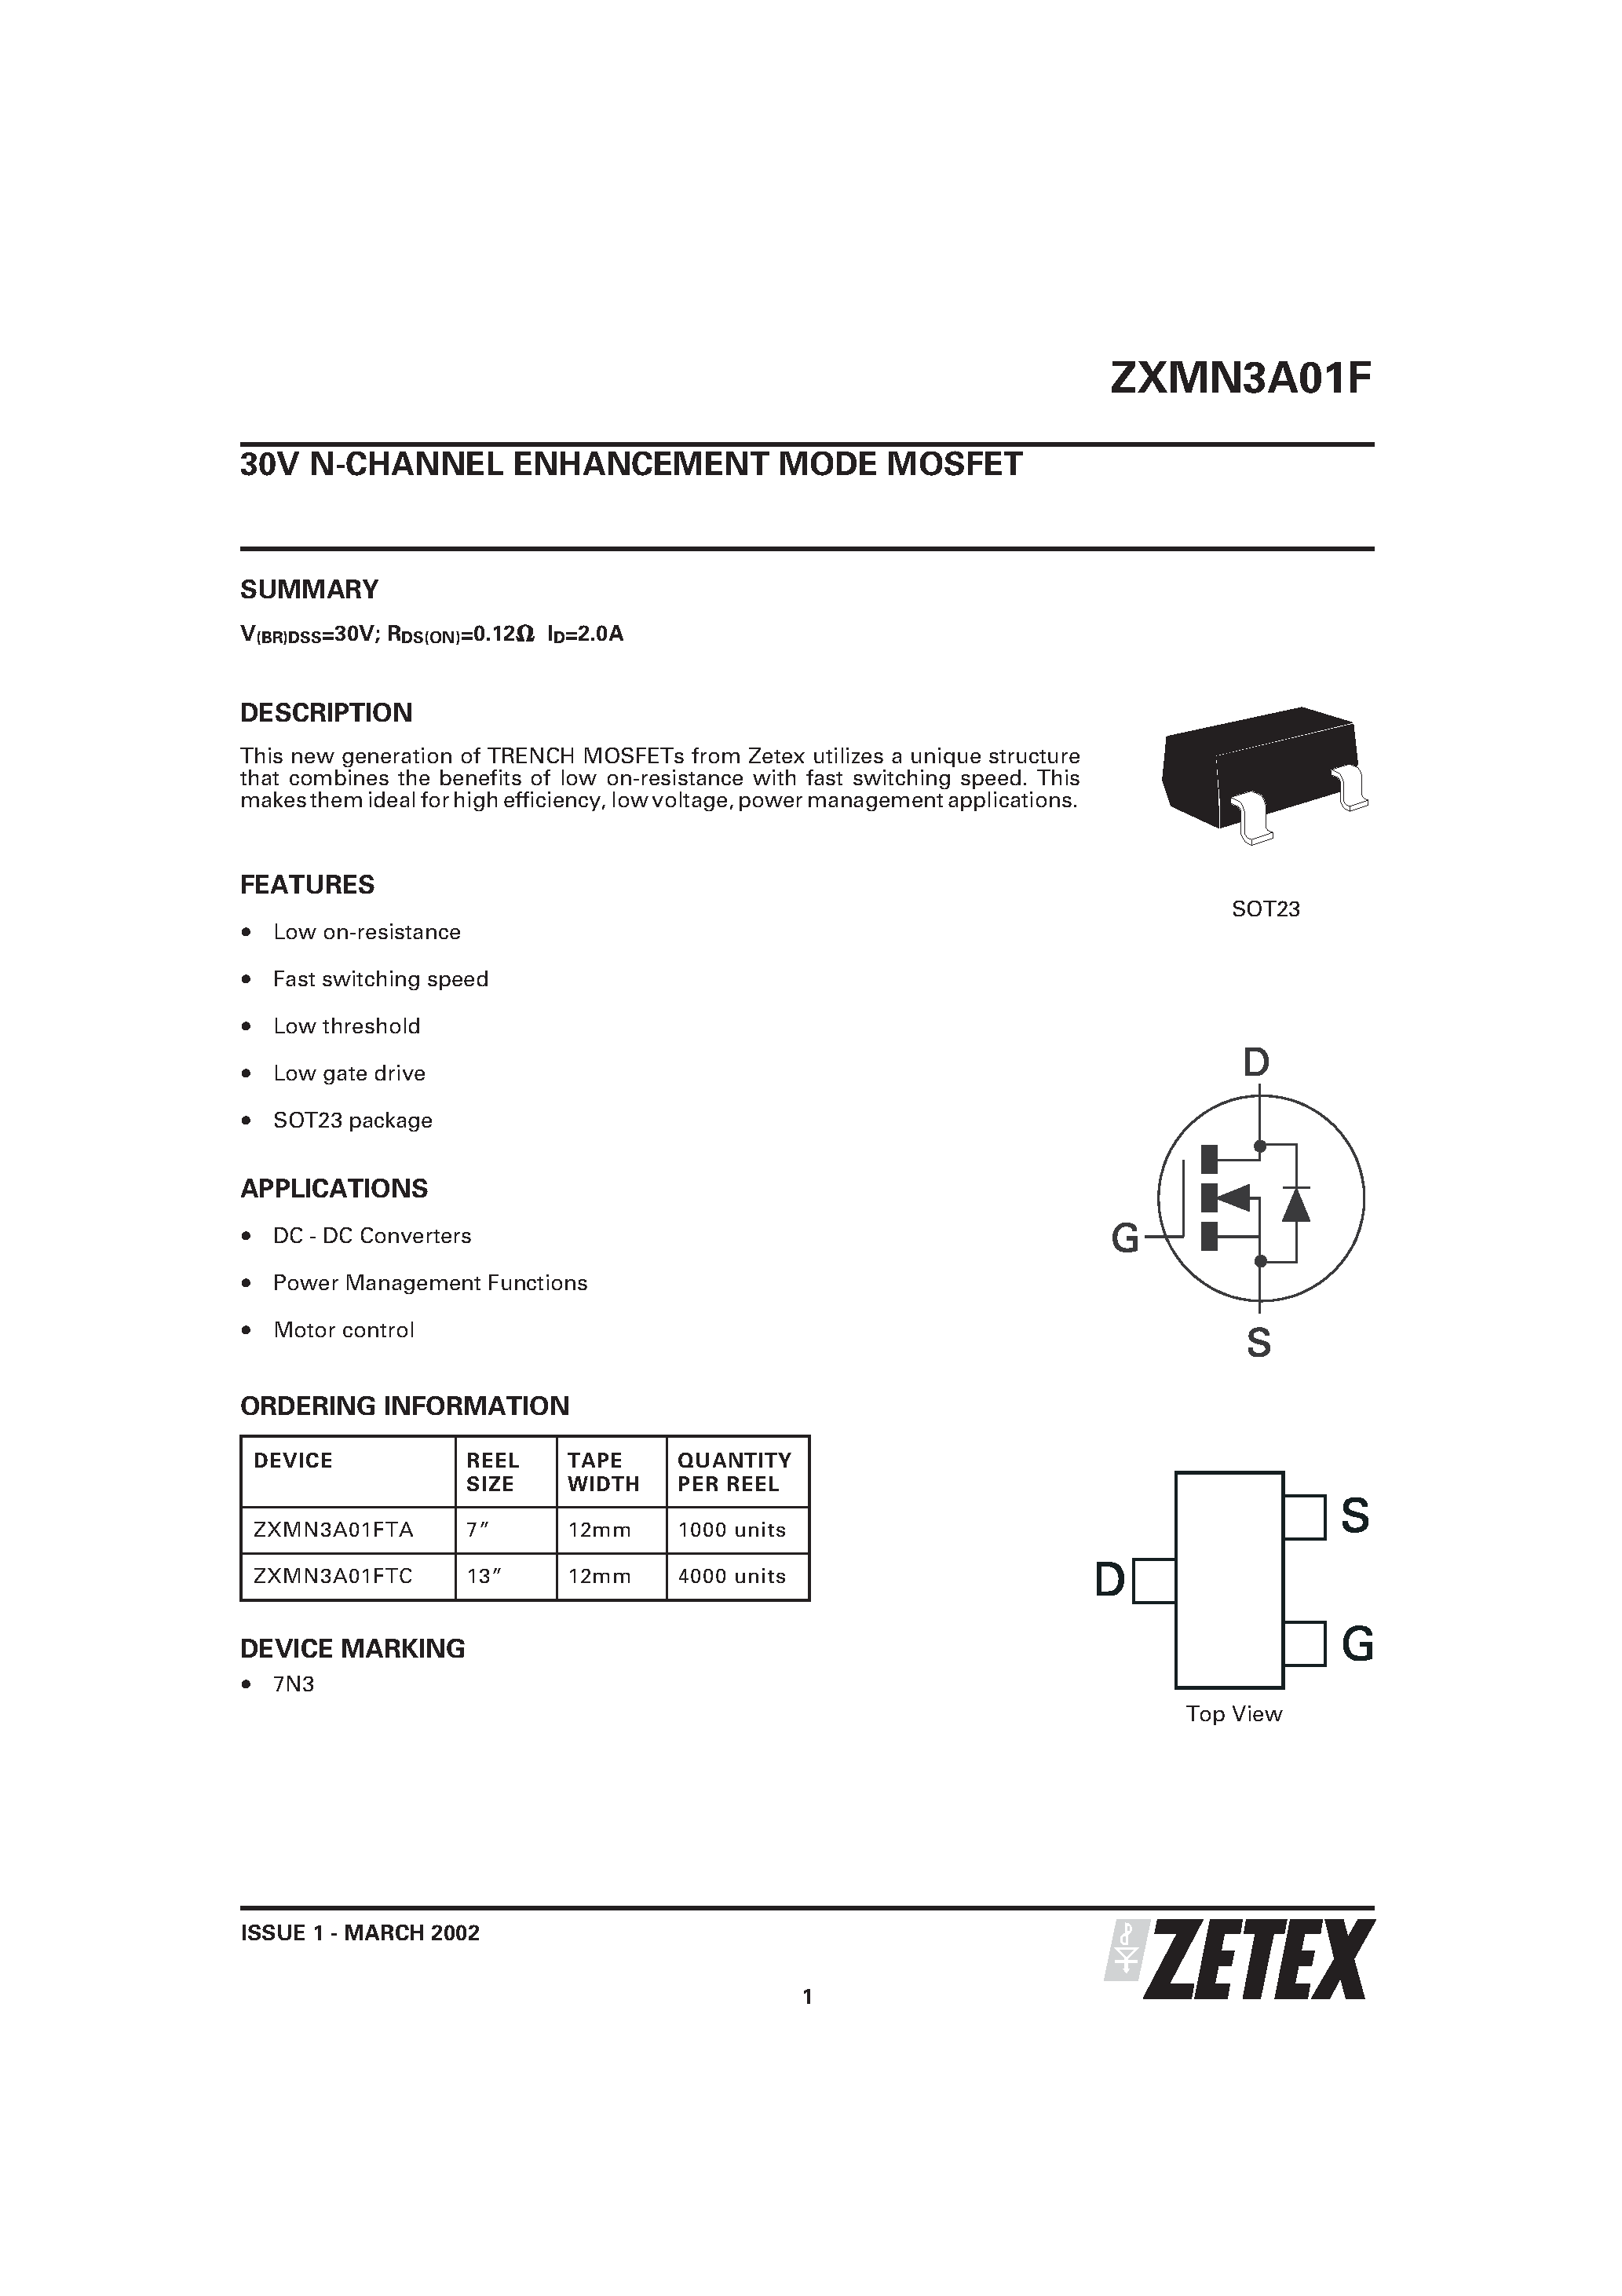 Datasheet ZXMN3A01 - 30V N-CHANNEL ENHANCEMENT MODE MOSFET page 1